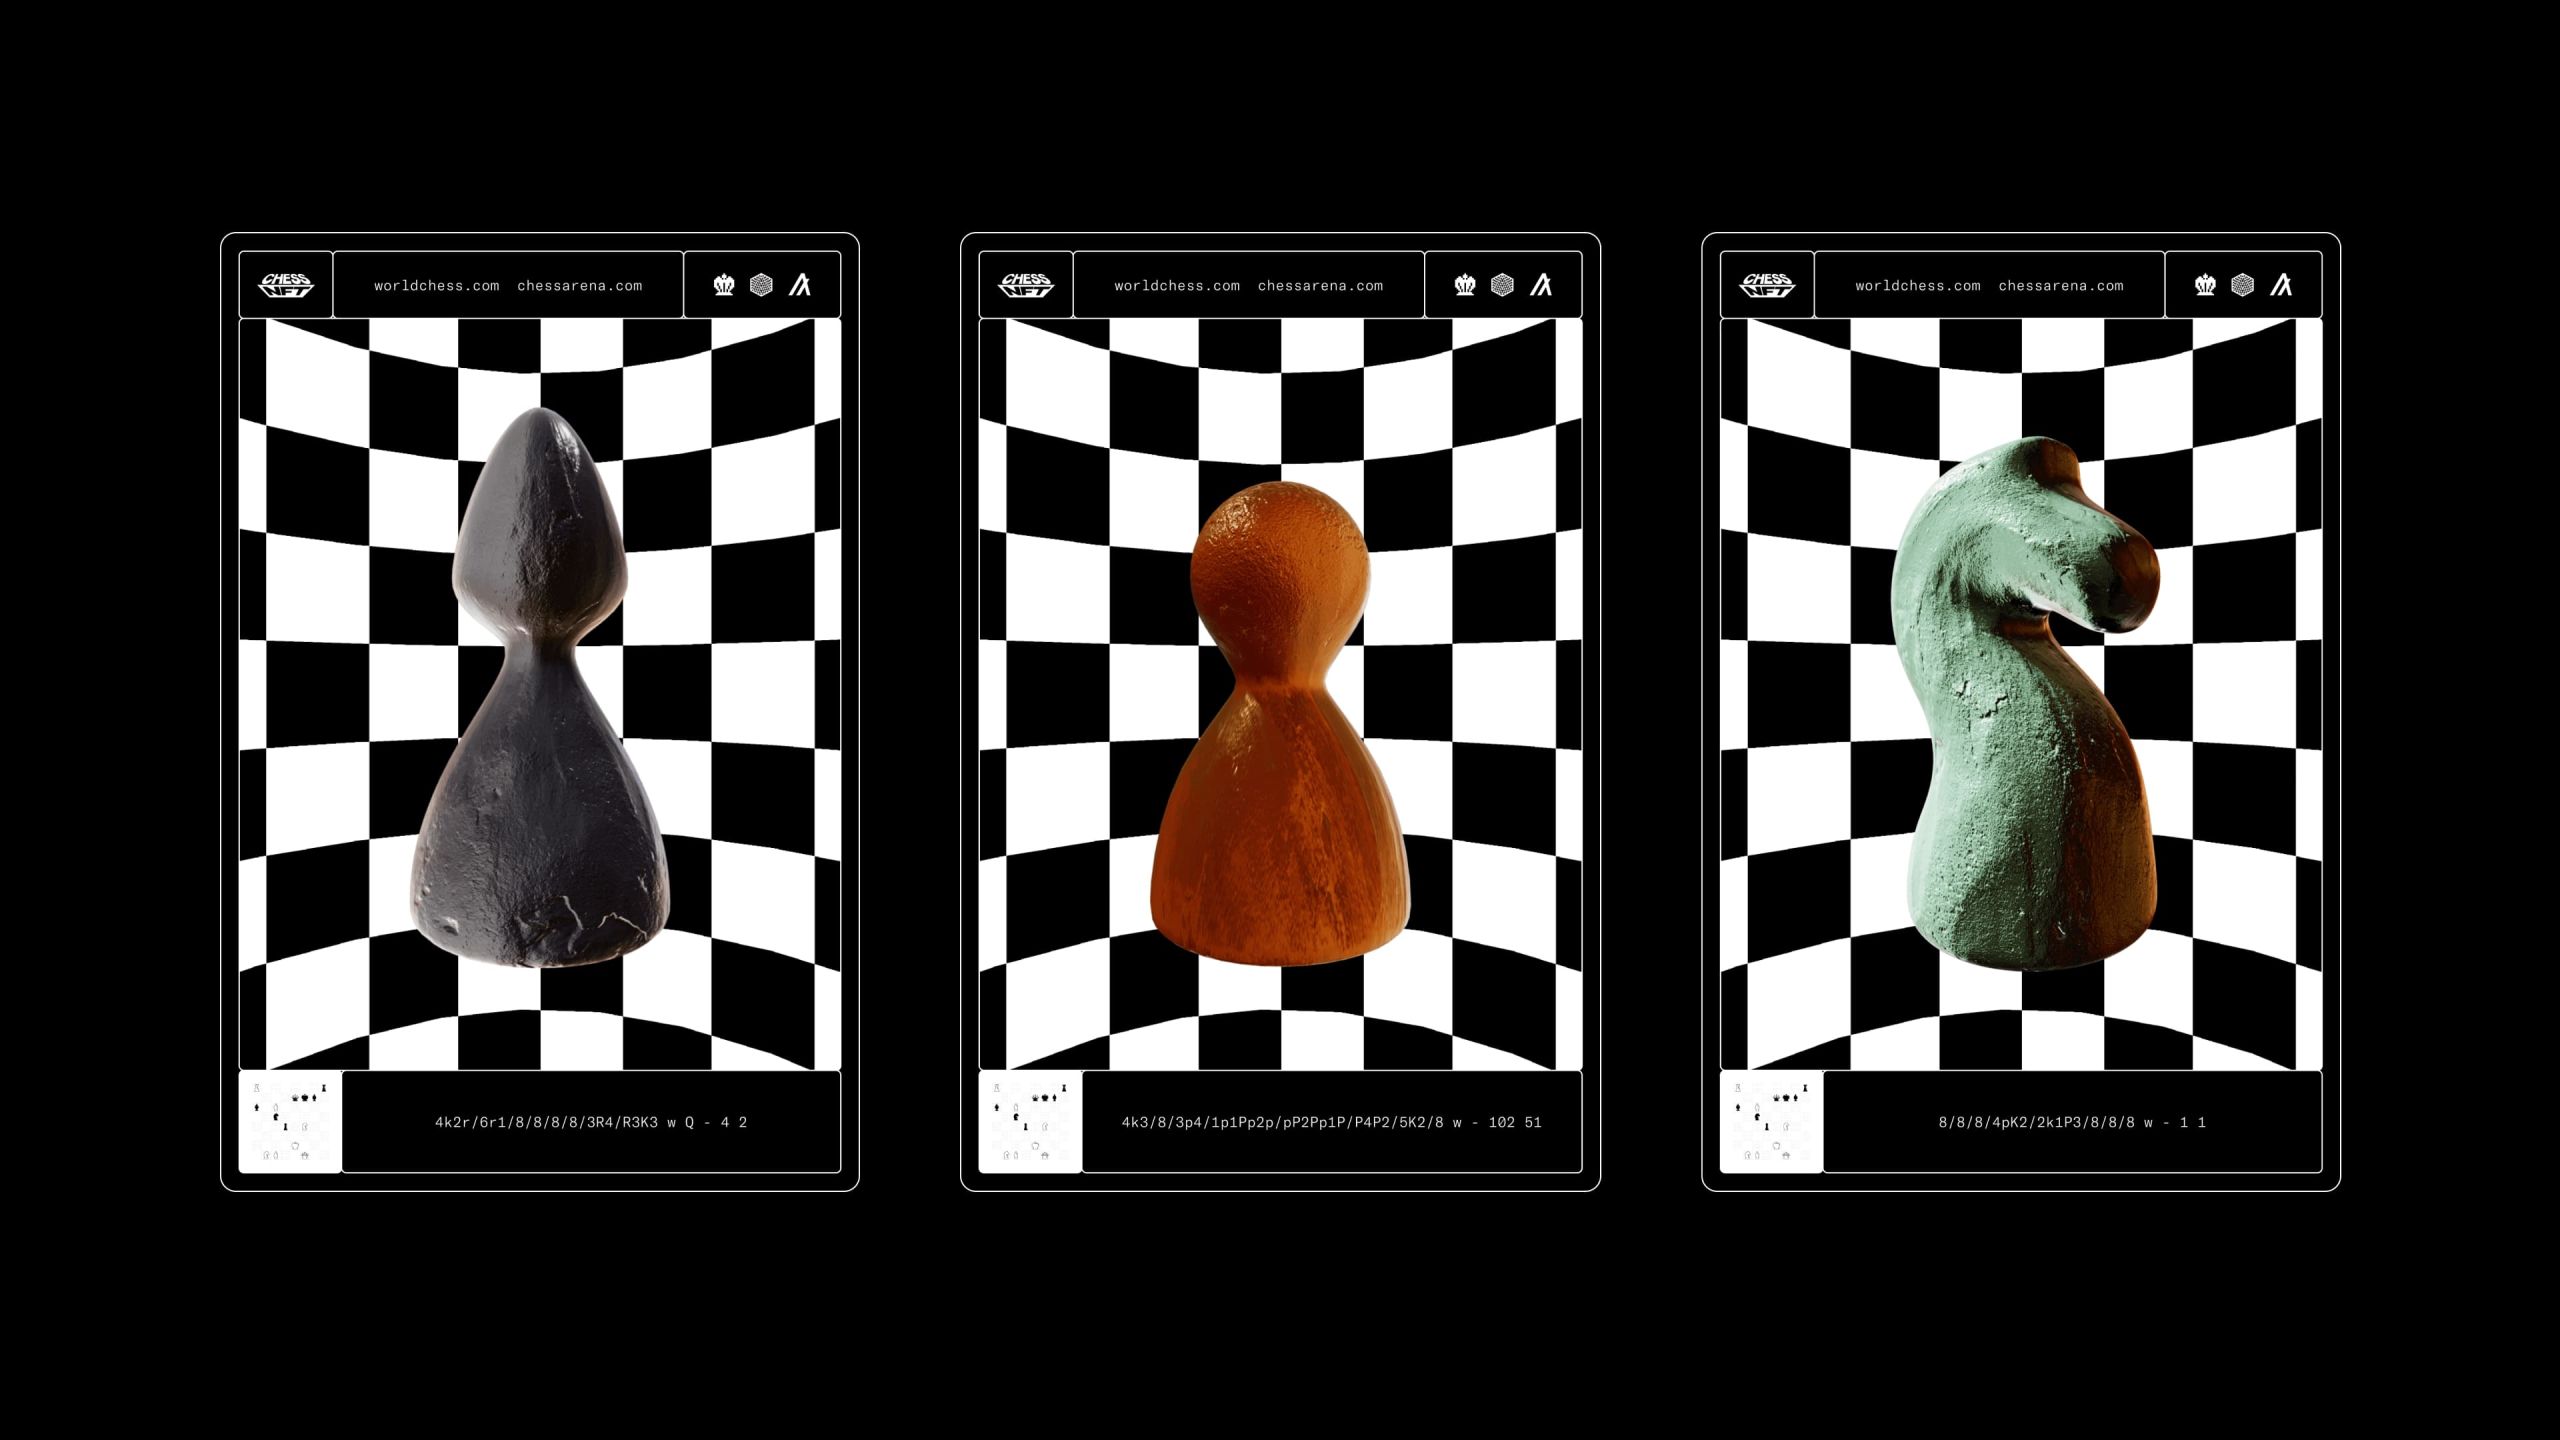 DJs Polo & Pan Put a Fresh Spin on Chess Piece NFTs in Immortal Game